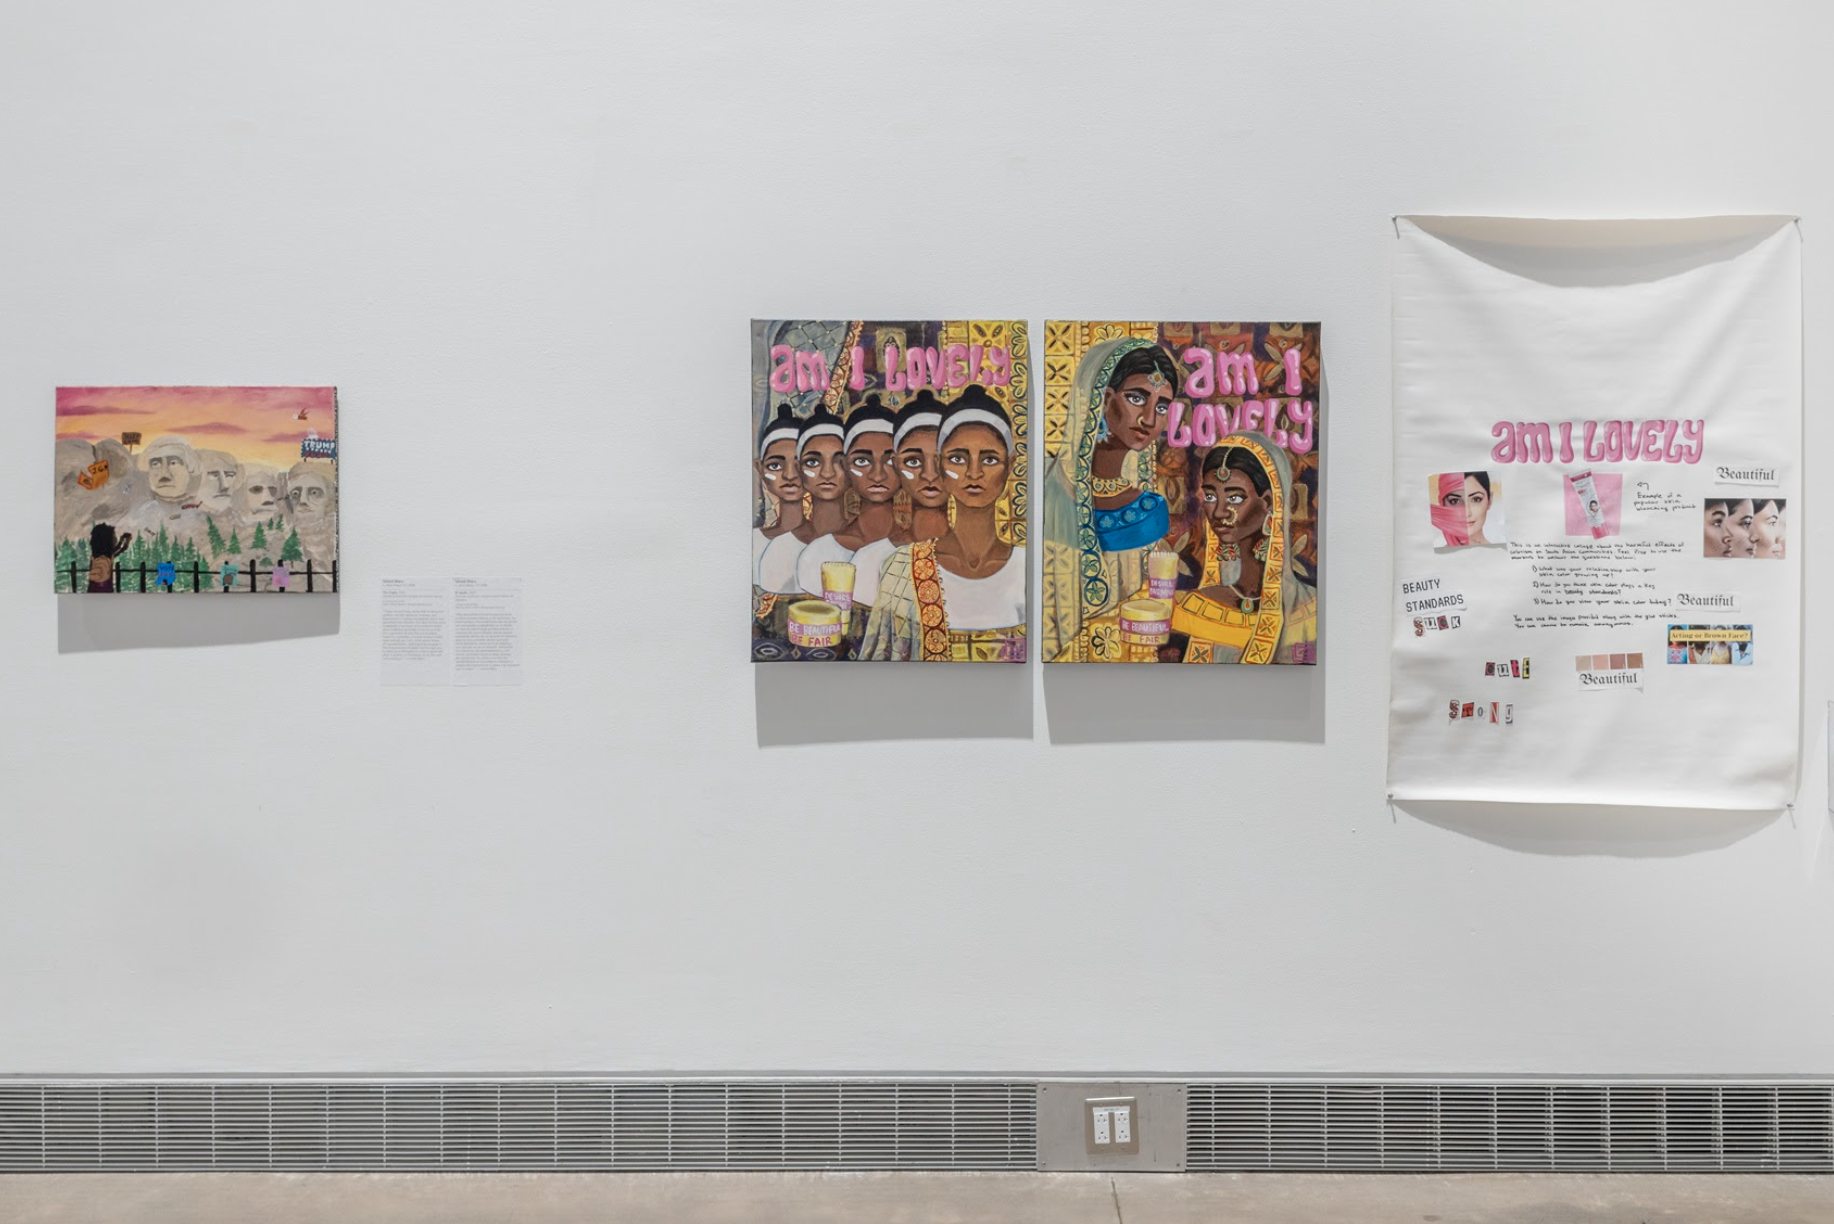 On a white exhibition wall you find two art pieces. The piece on the left is a small acrylic painting of tourists visiting Mount Rushmore. On the right is a tryptic of paintings. The first two are on stretched canvas of the same size and the third is on a larger piece of canvas. All three of them have the phrase “am I lovely” in pink, bubbly letters. The first two are depictions of South Asian women, dressed in traditional garments applying or holding bleaching cream and the third shares images and text about beauty standards.